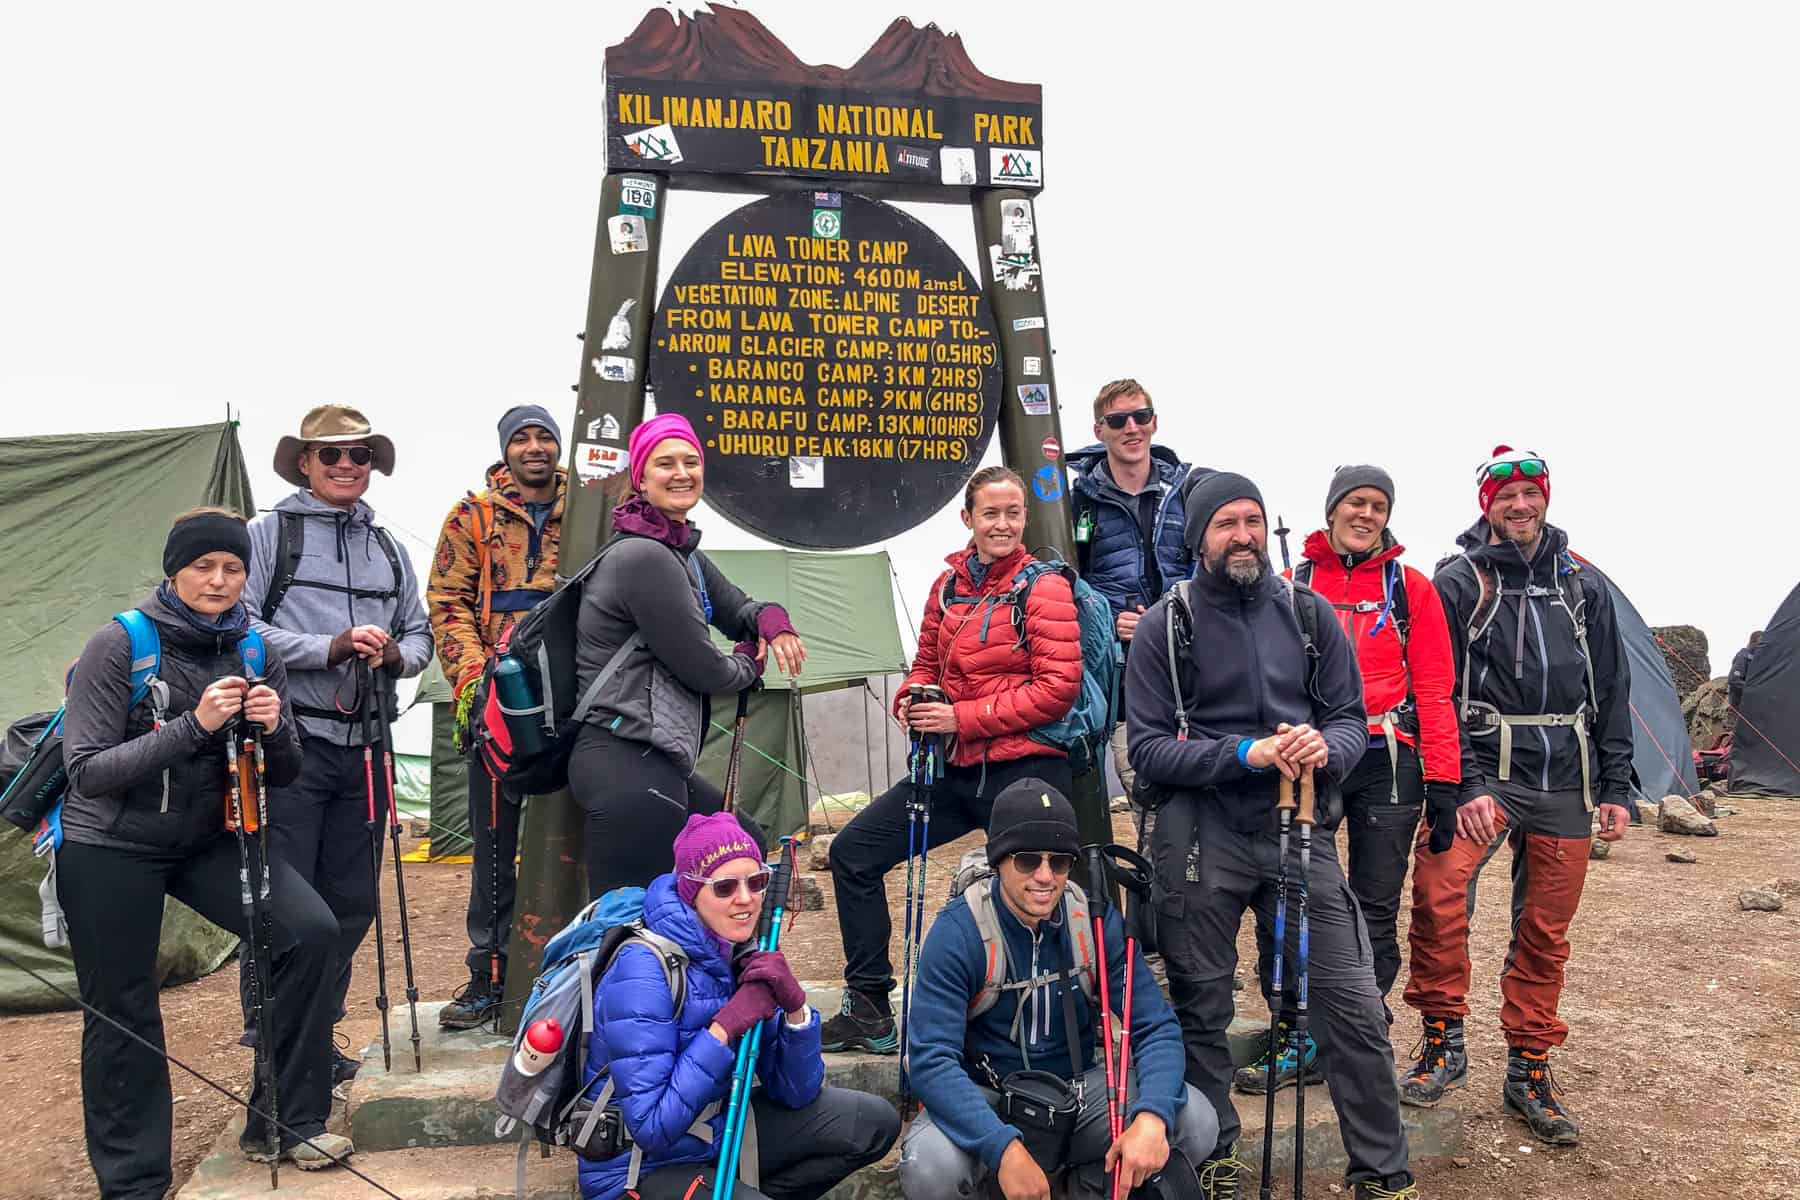 A Kilimanjaro trek group, looking tired, at the Lava Tower Sign with green camp tents set up behind them.